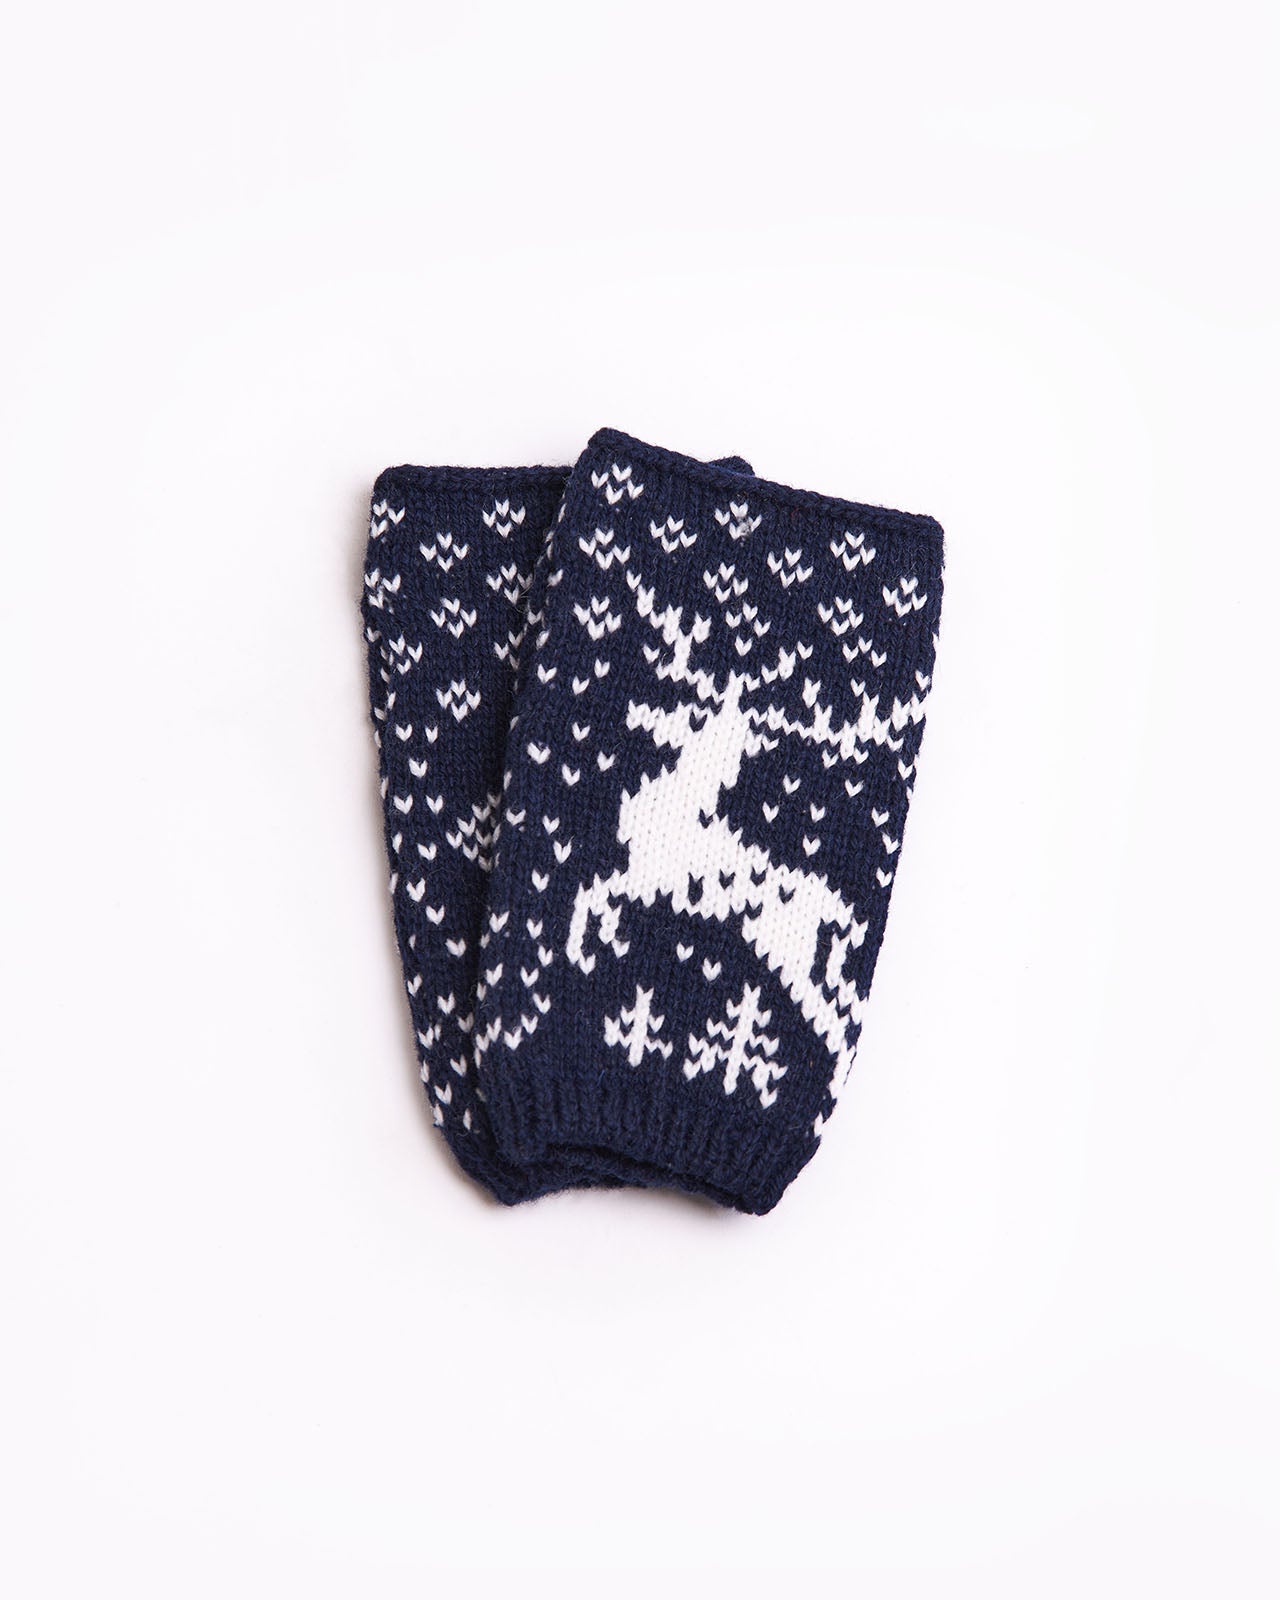 Wool mitts with reindeers